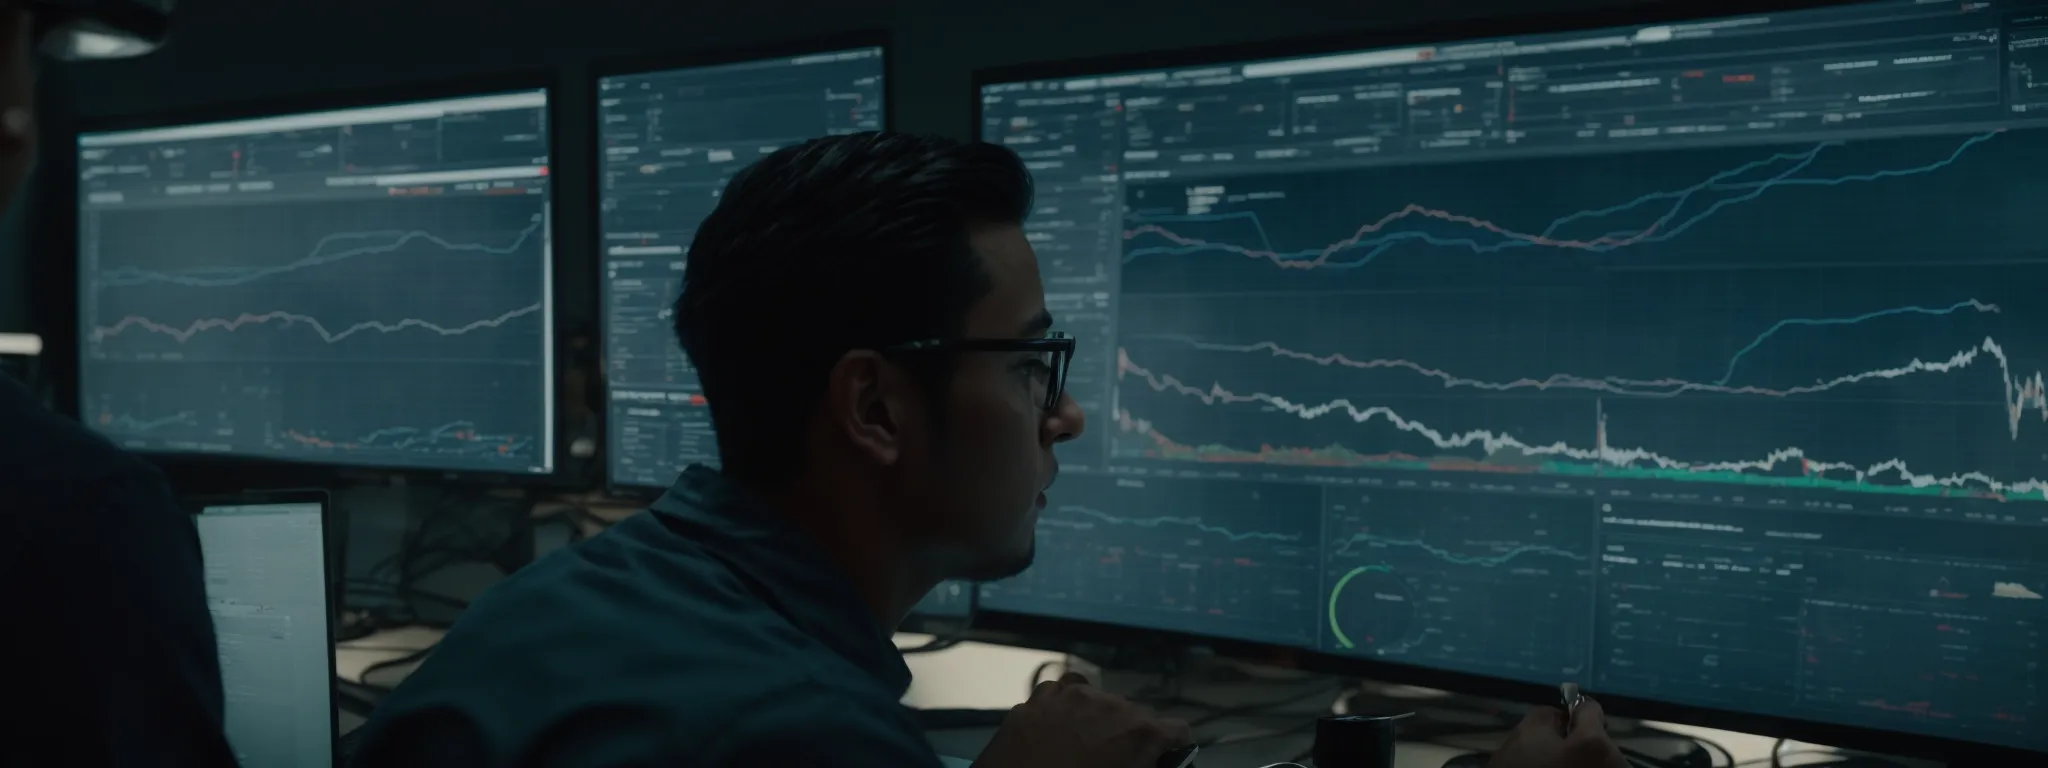 a data analyst intently scrutinizes a complex dashboard with fluctuating analytics graphs and charts indicative of seo performance.